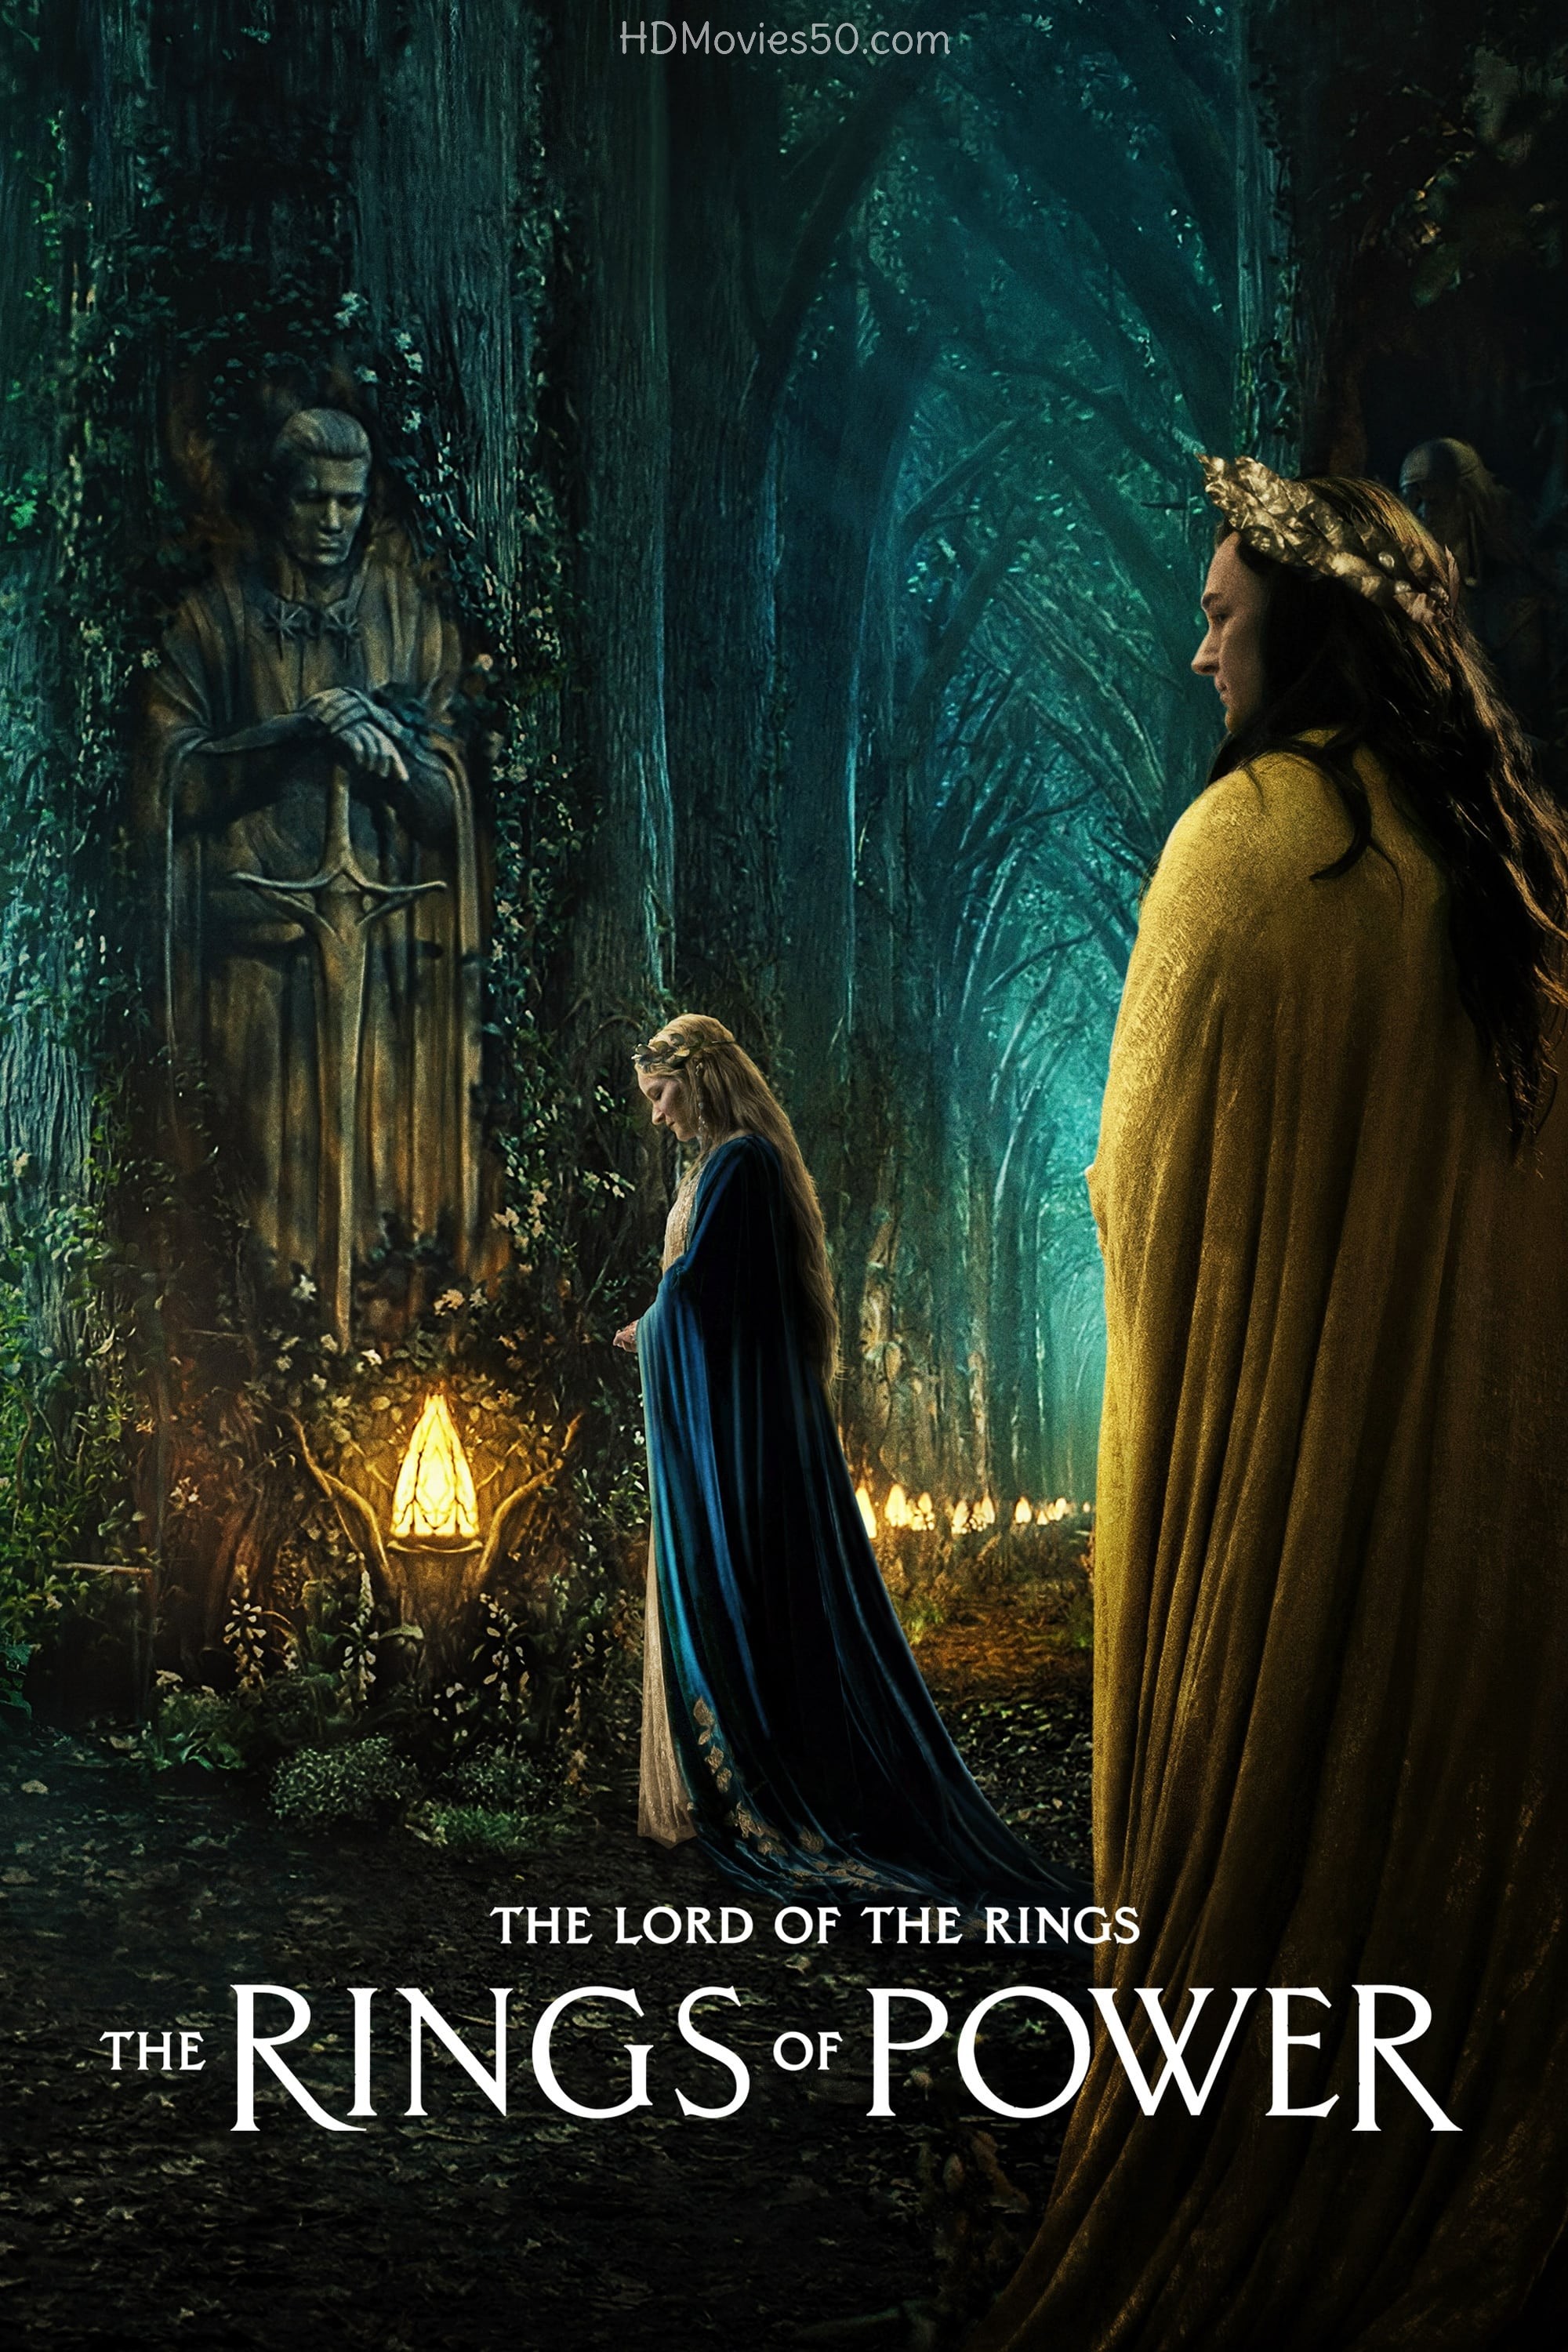 Download The Lord of The Rings The Rings Of Power 2022 S01E06 Hindi ORG Dual Audio 1080p AMZN HDRip MSub 1.2GB